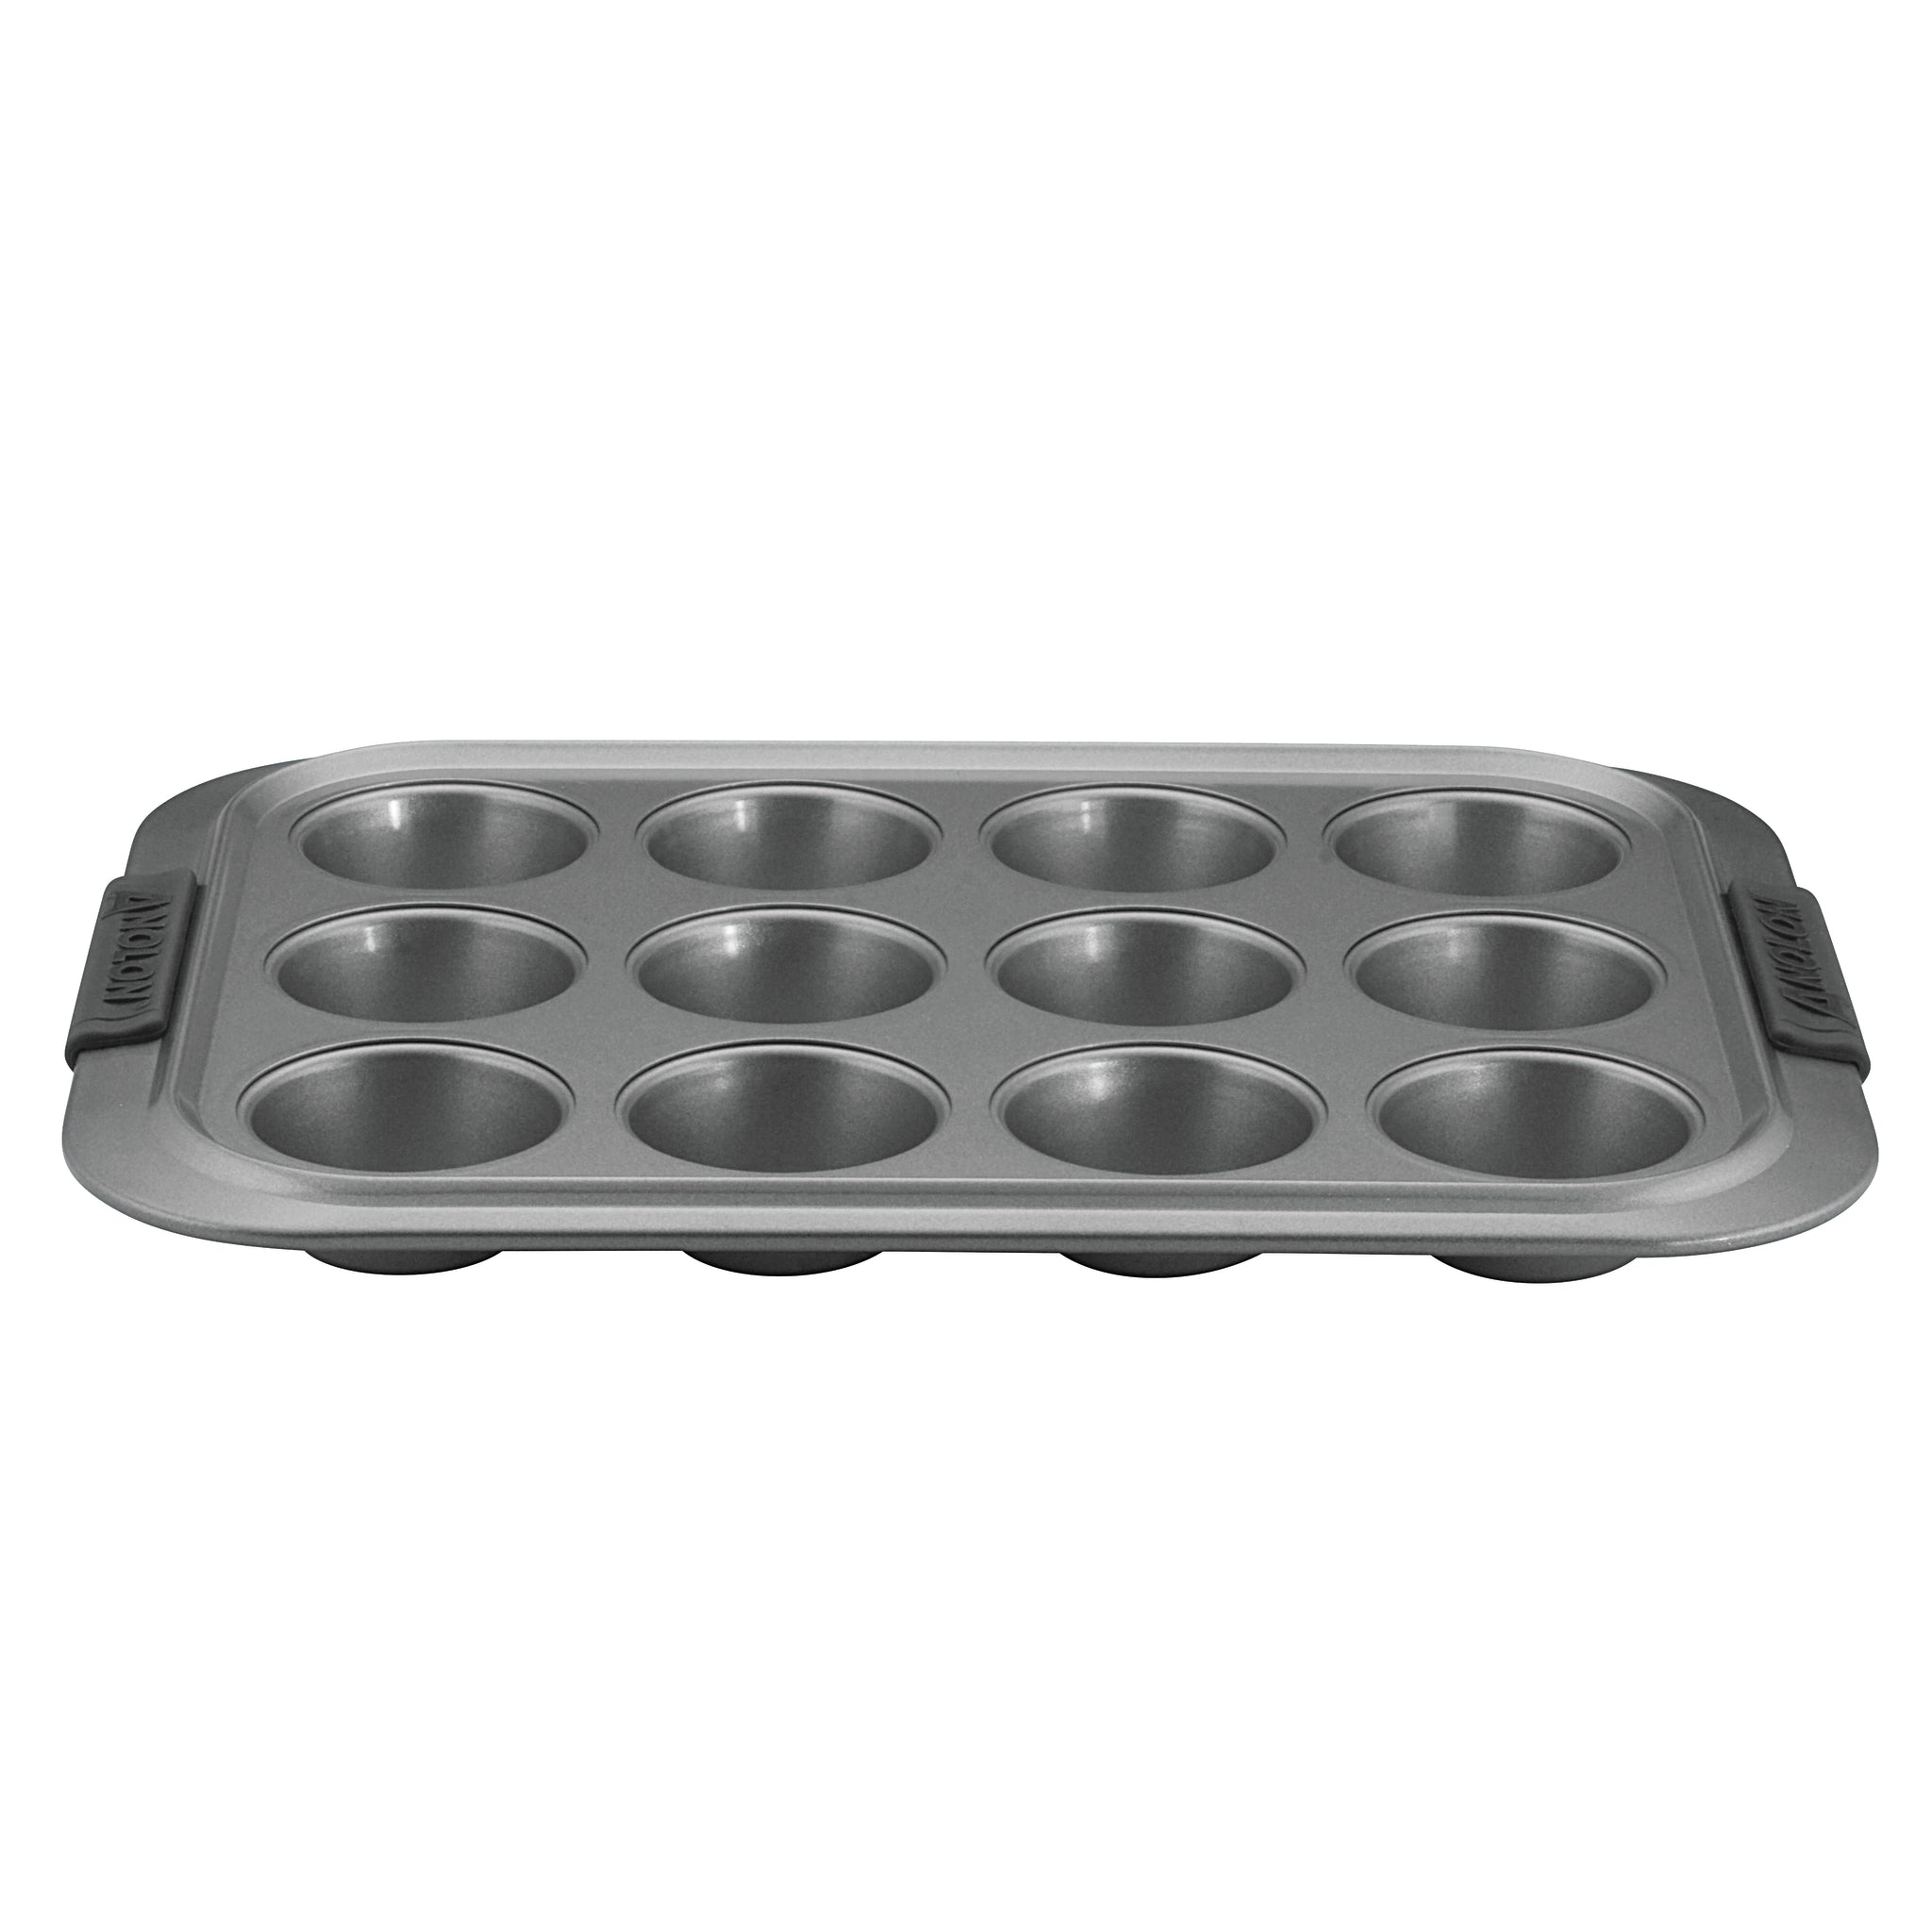 Muffin Pan with Lid